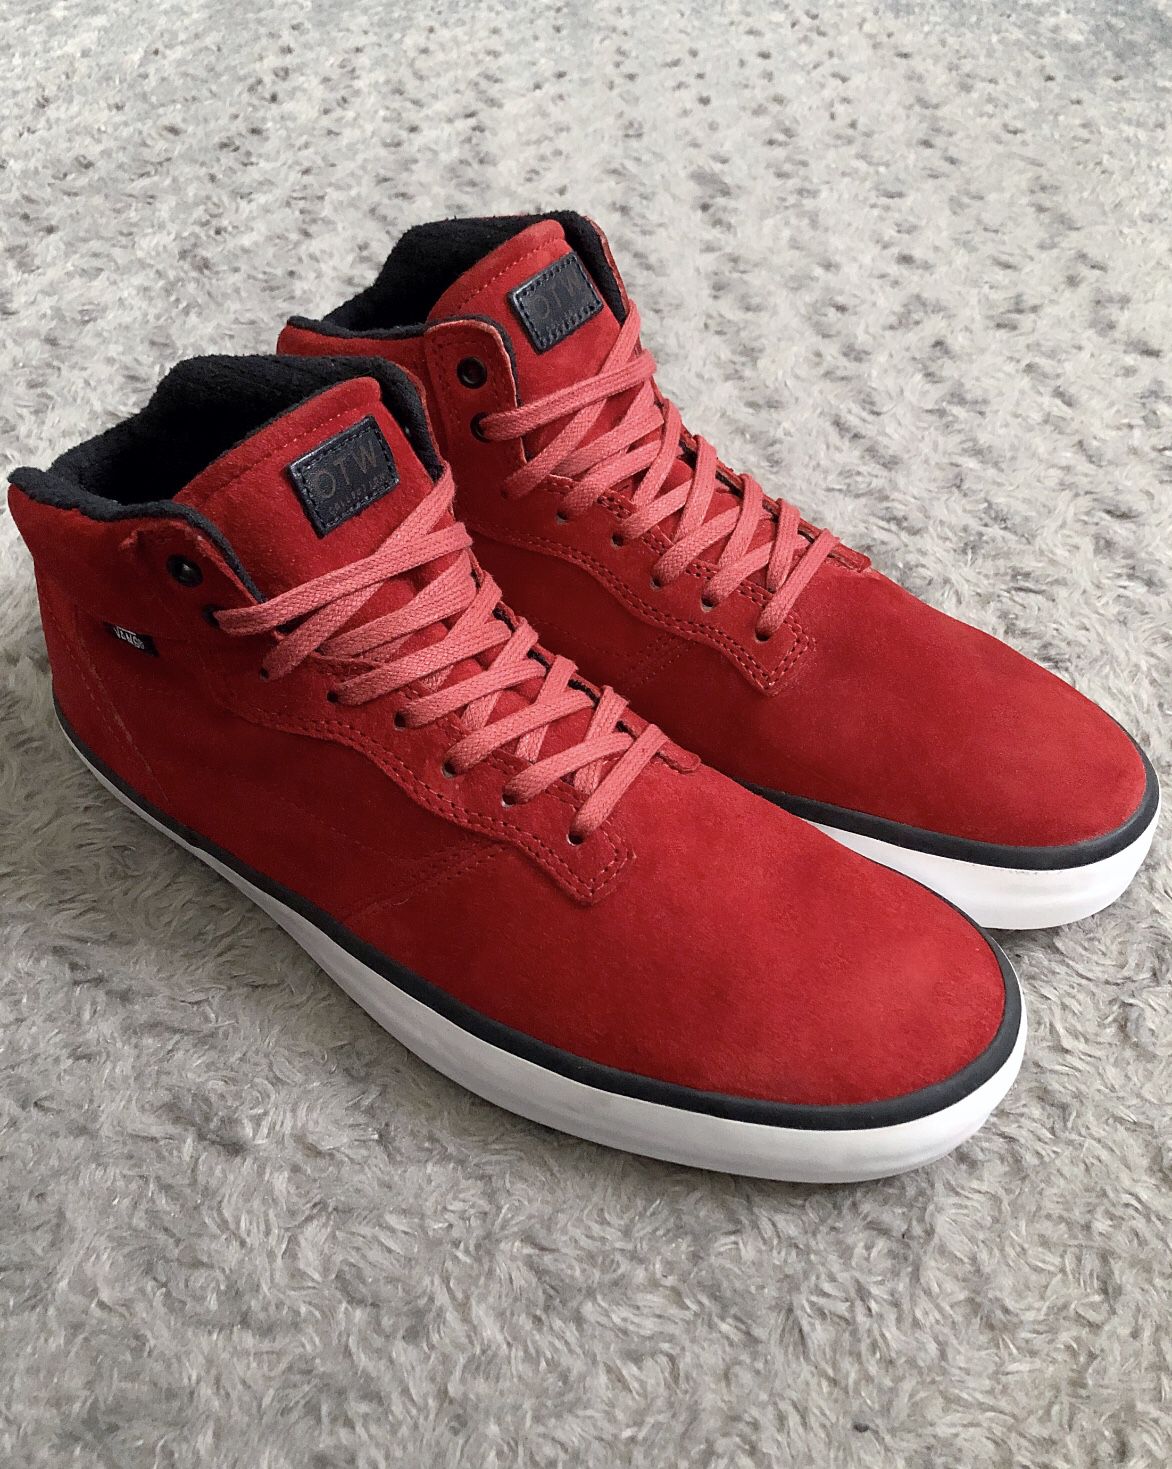 Men’s Vans OTW Piercy Mid Hi-Top retail $108 size 9.5 Like new! Great condition Skateboard Shoes Suede color Red